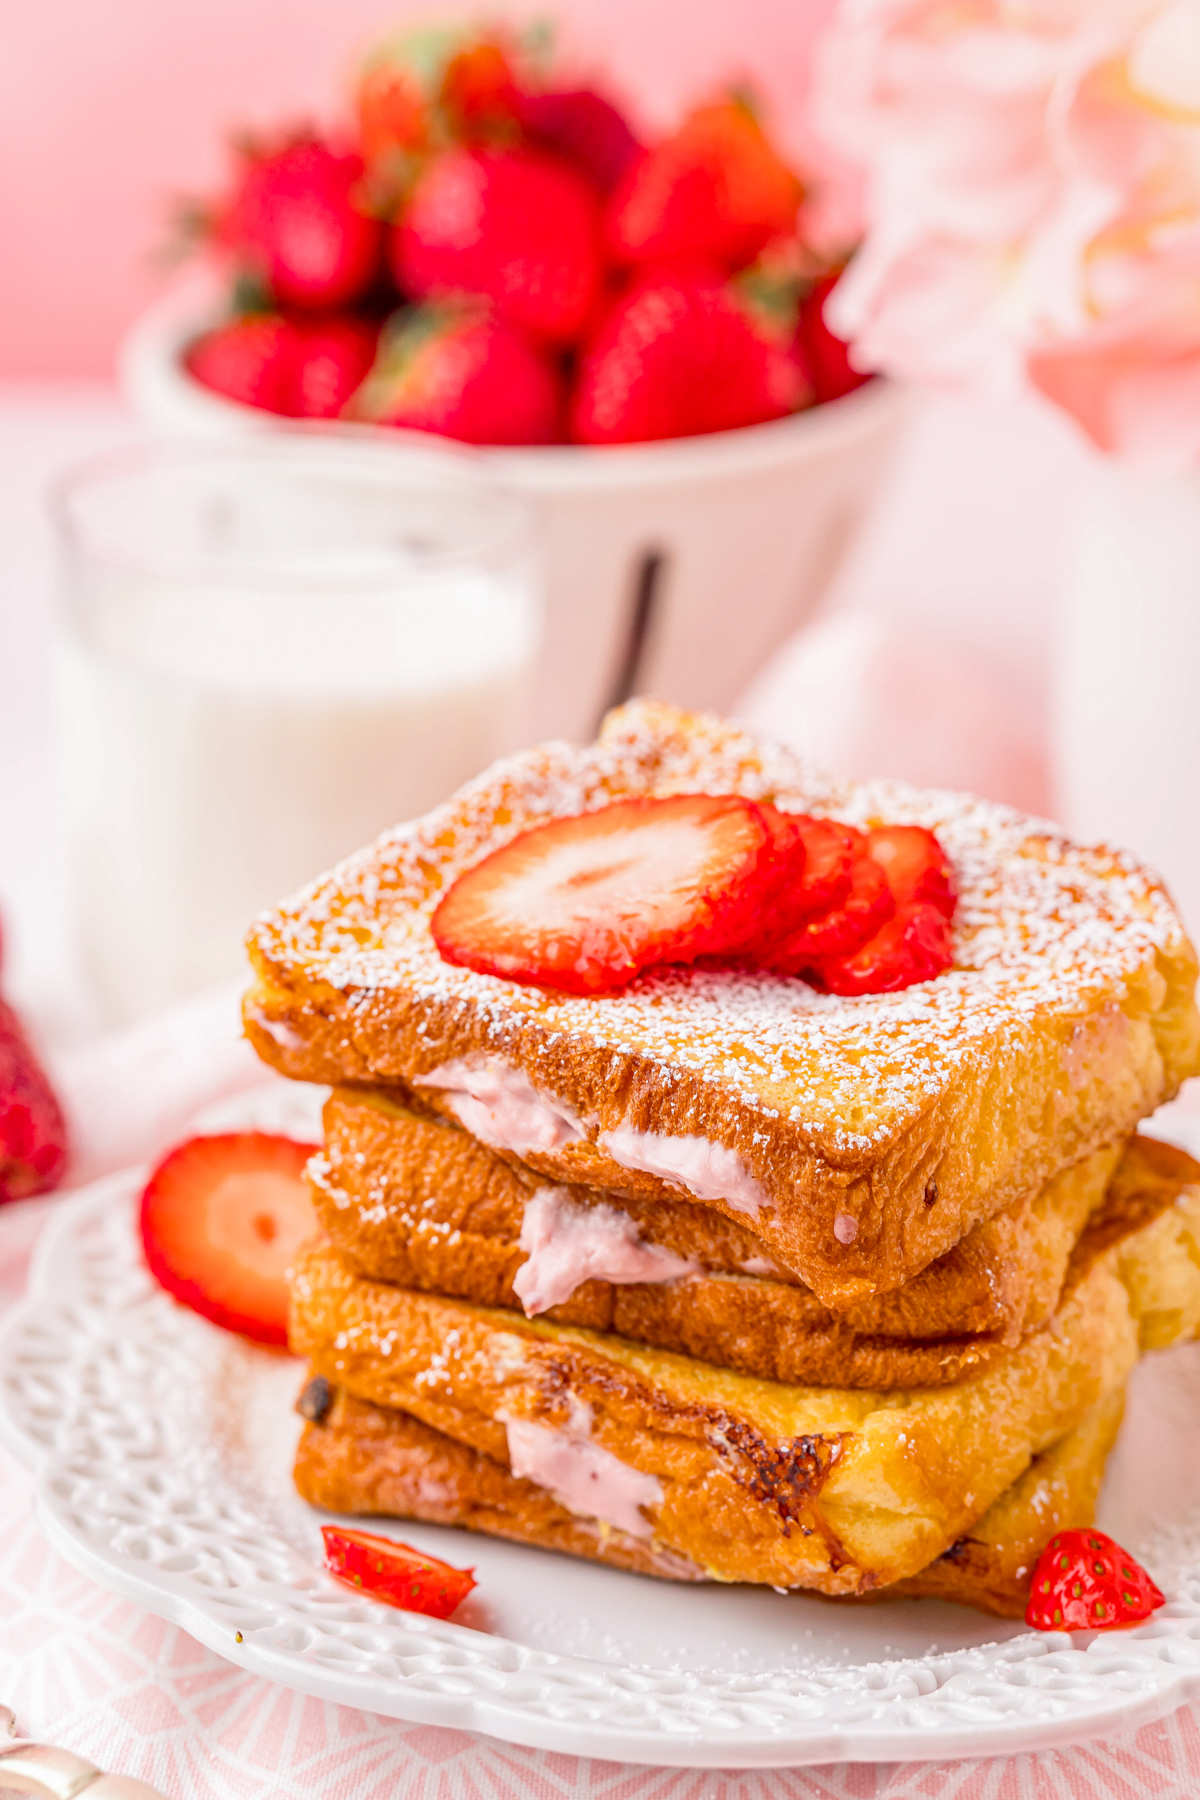 Side view of Stuffed French Toast showing the cheesecake filling